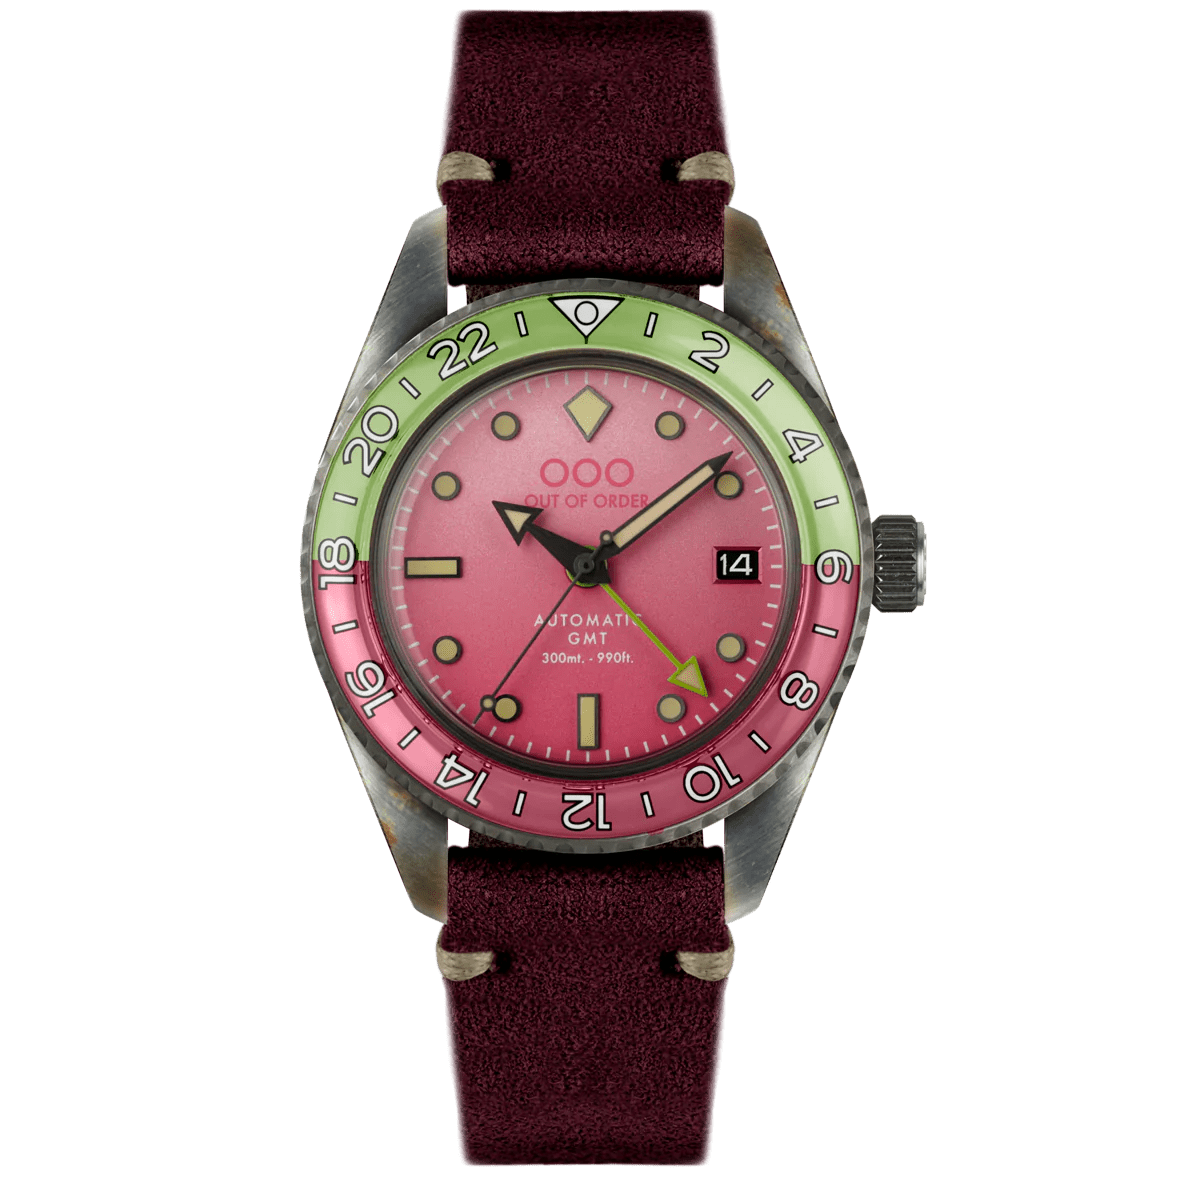 Cosmopolitan Automatic GMT OUT OF ORDER - MONSIEUR